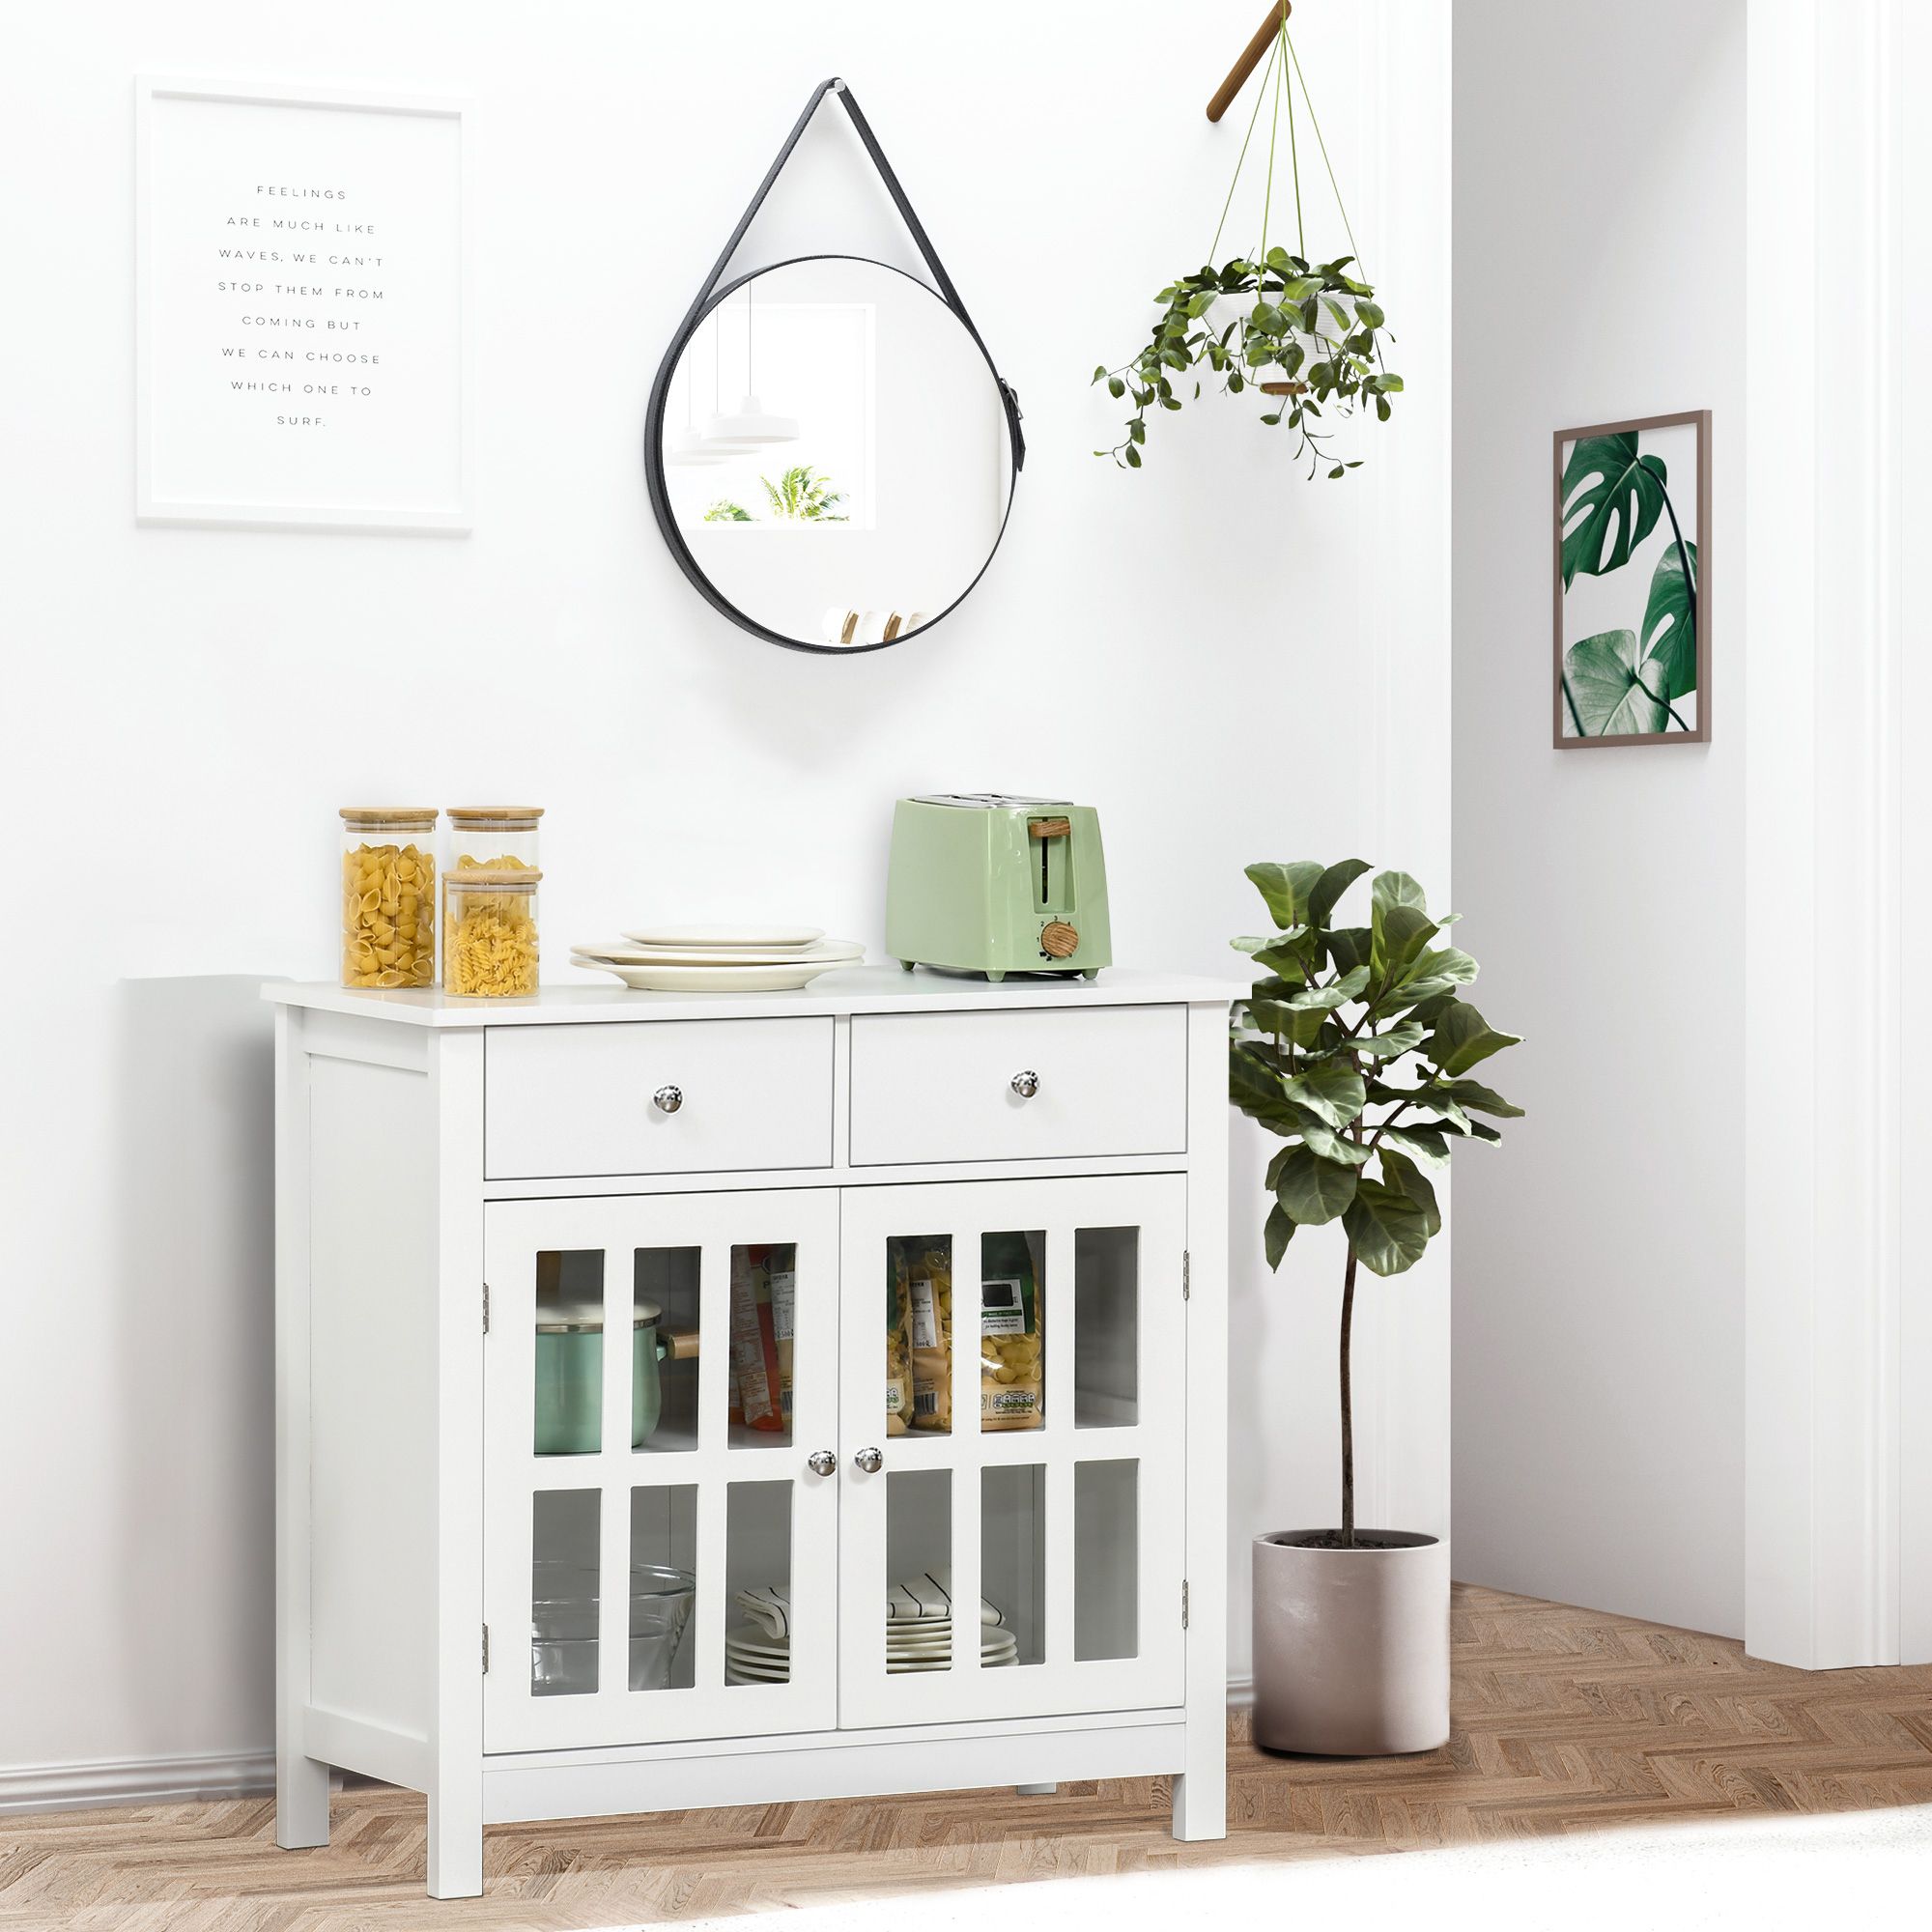 Homcom Sideboard Buffet Cabinet, Kitchen Storage Cabinet Cupboard Console  Table With Glass Doors, Drawers For Bar, Dining Room, Hallway, White |  Aosom Canada Throughout Most Popular Sideboards Cupboard Console Table (View 8 of 15)